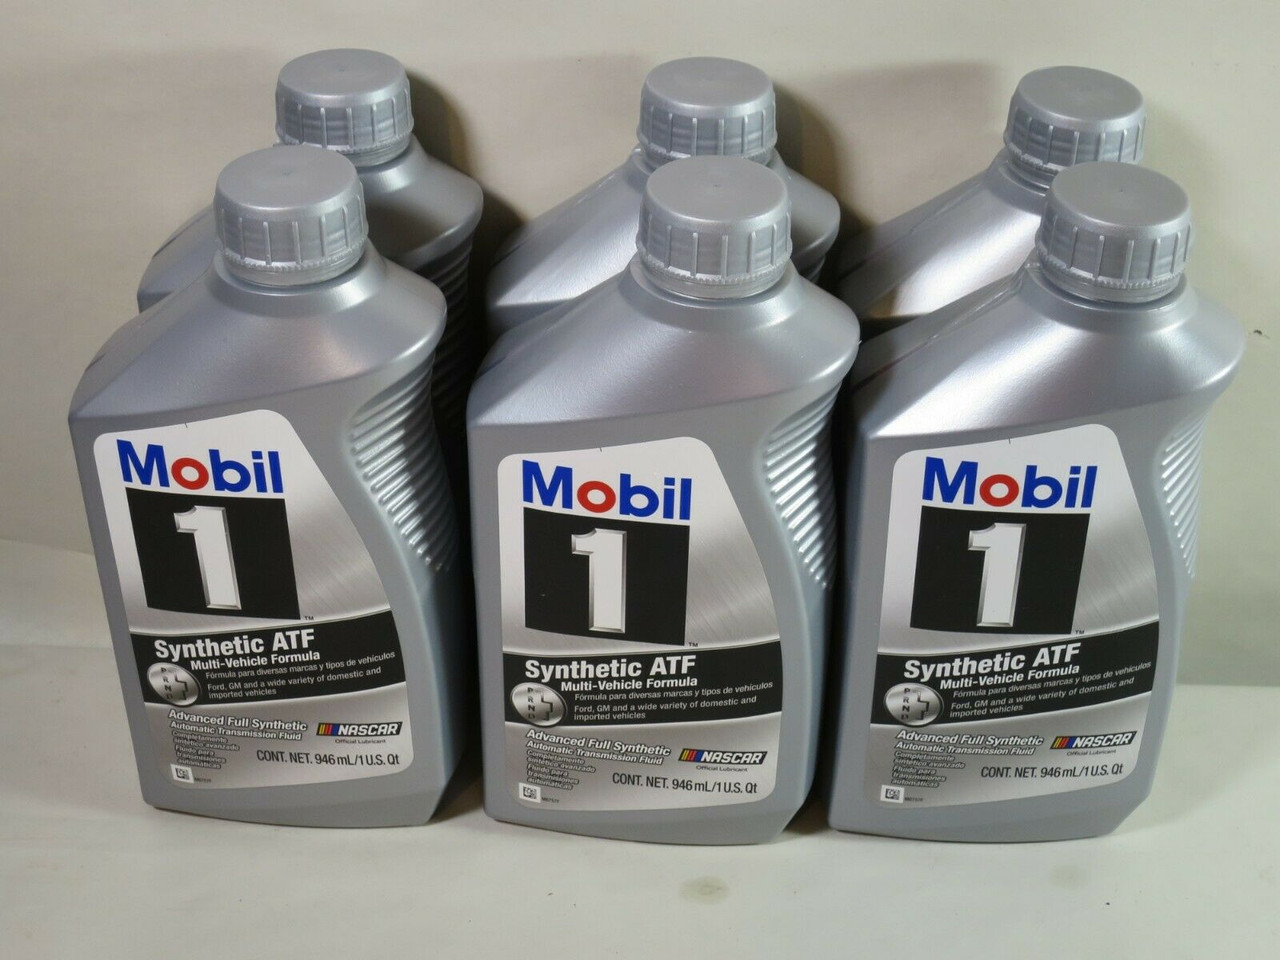 Mobil 1 atf. Mobil 1 Synthetic АТФ. Mobil 1 Synthetic ATF 152582. Mobil 1 syn ATF, кг. Mobil ATF 3324.